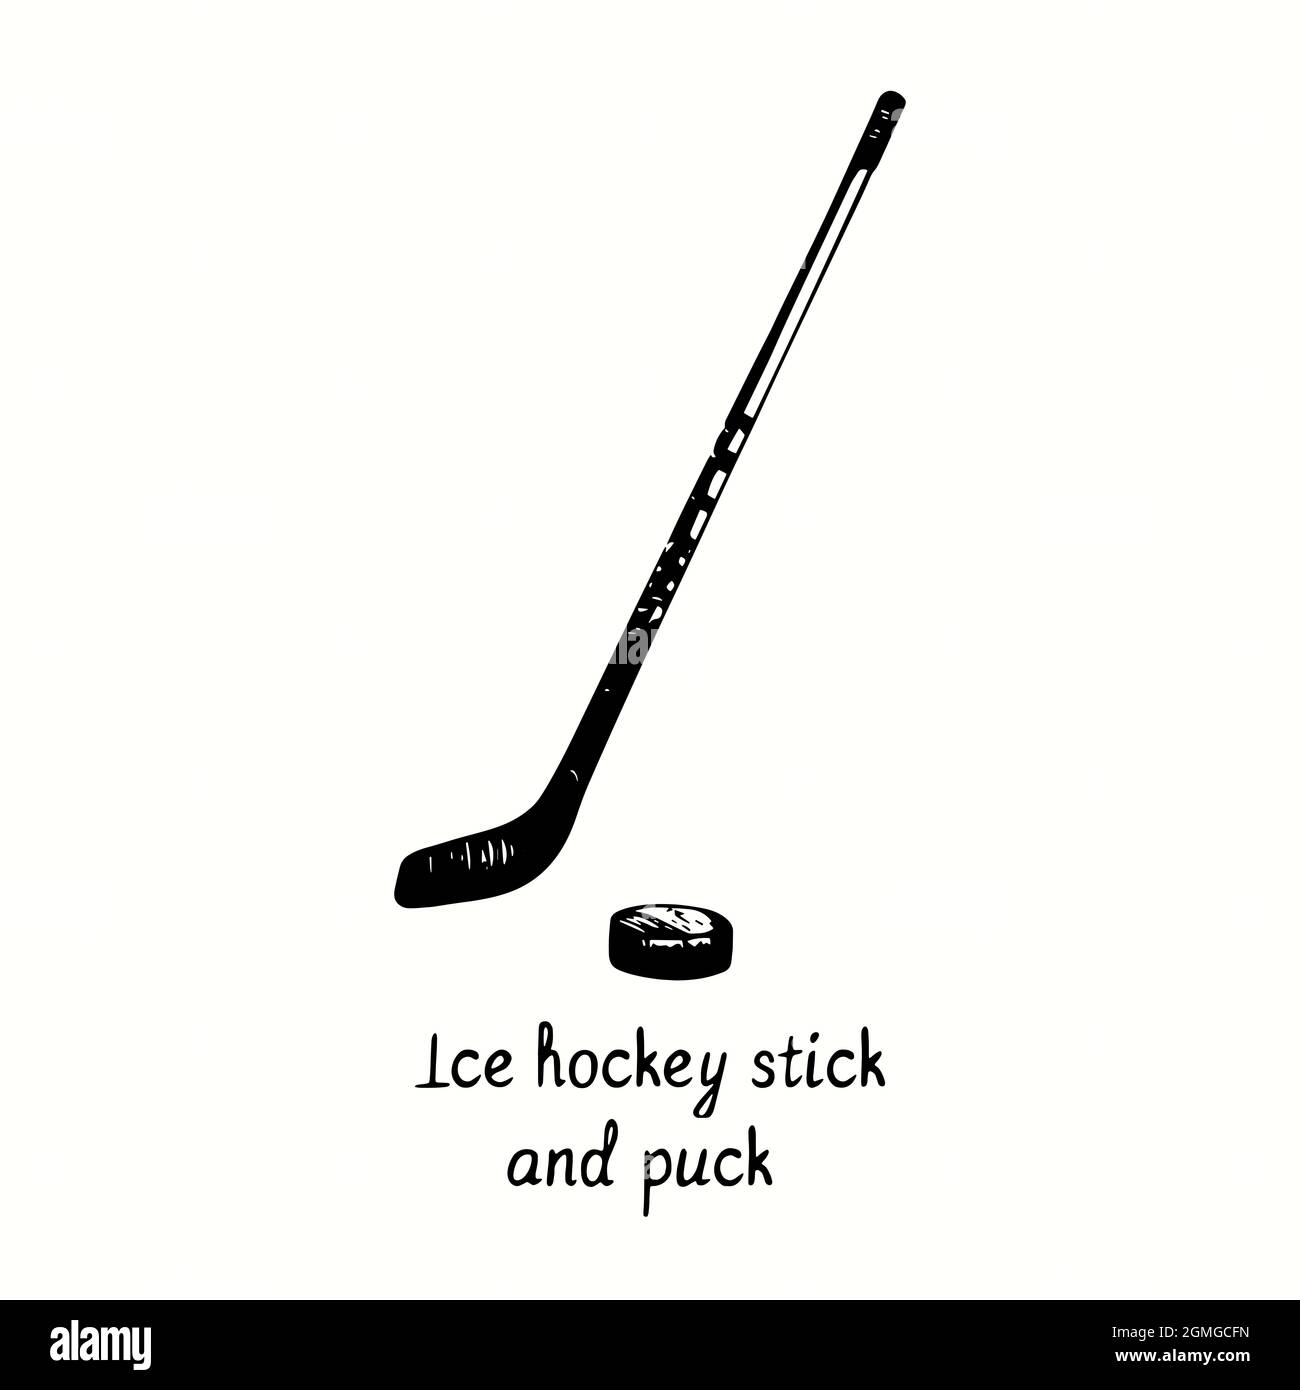 Ice hockey stick and puck. Ink black and white doodle drawing in